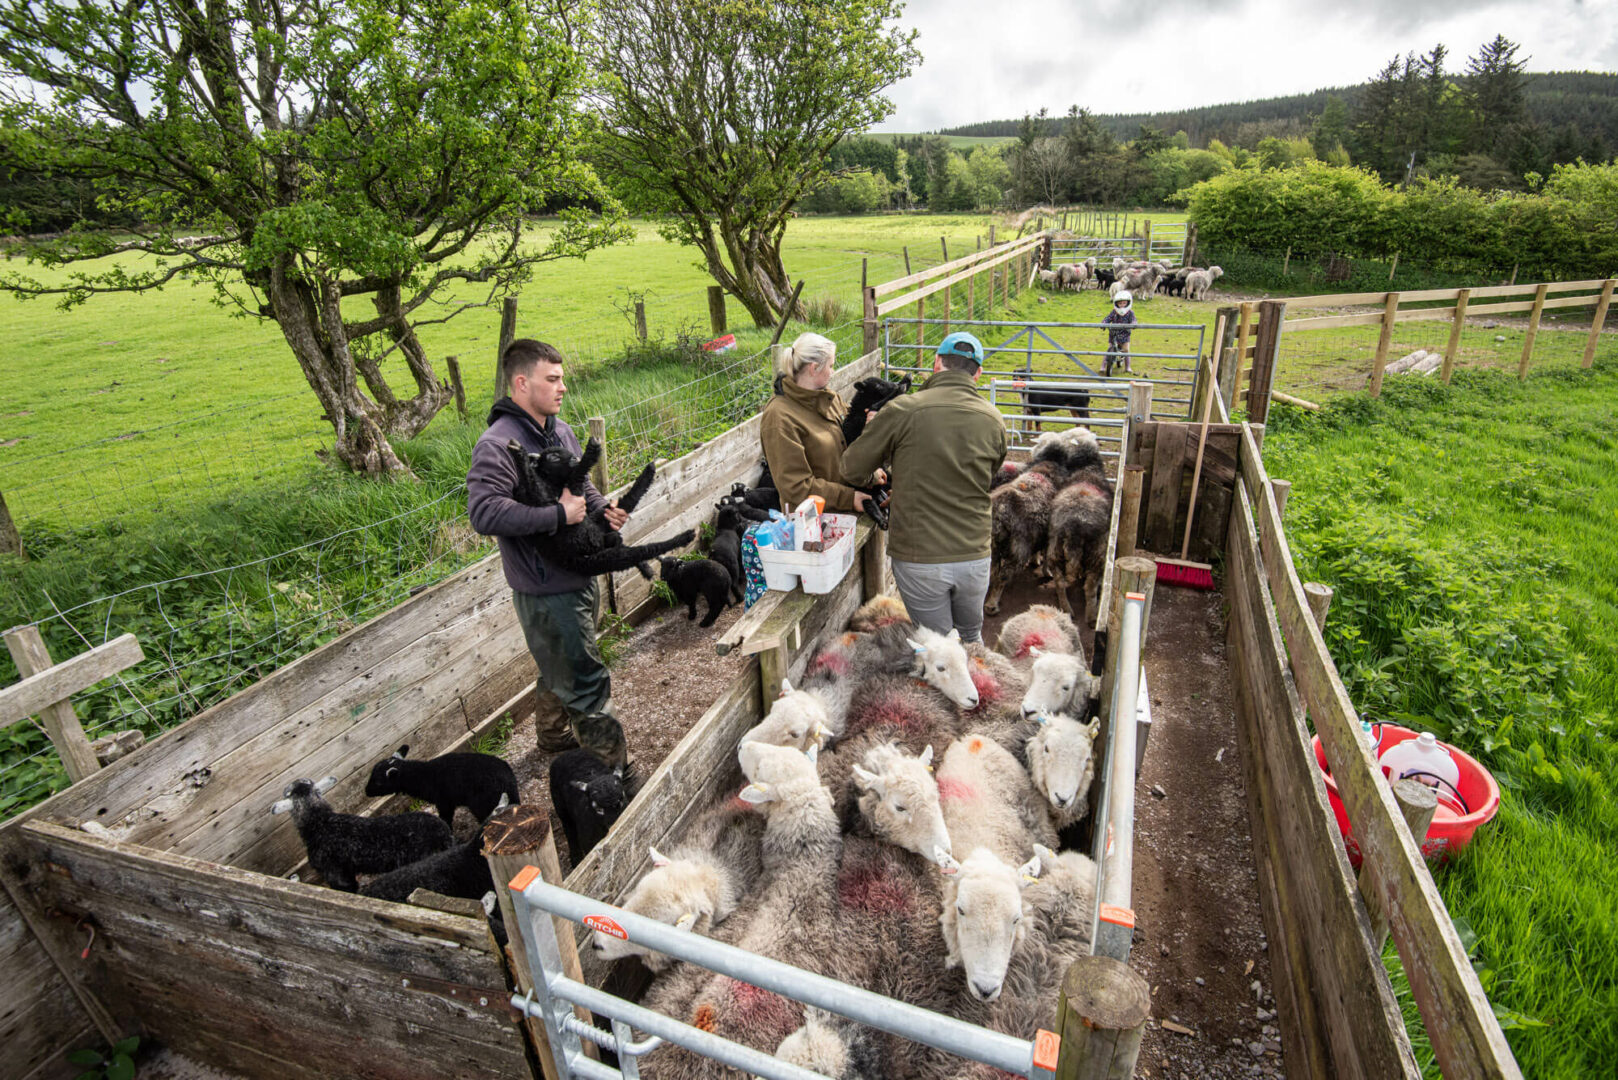 (c) Rob Fraser/Our Upland Commons – Checking on the ewes and lambs Kinniside Common